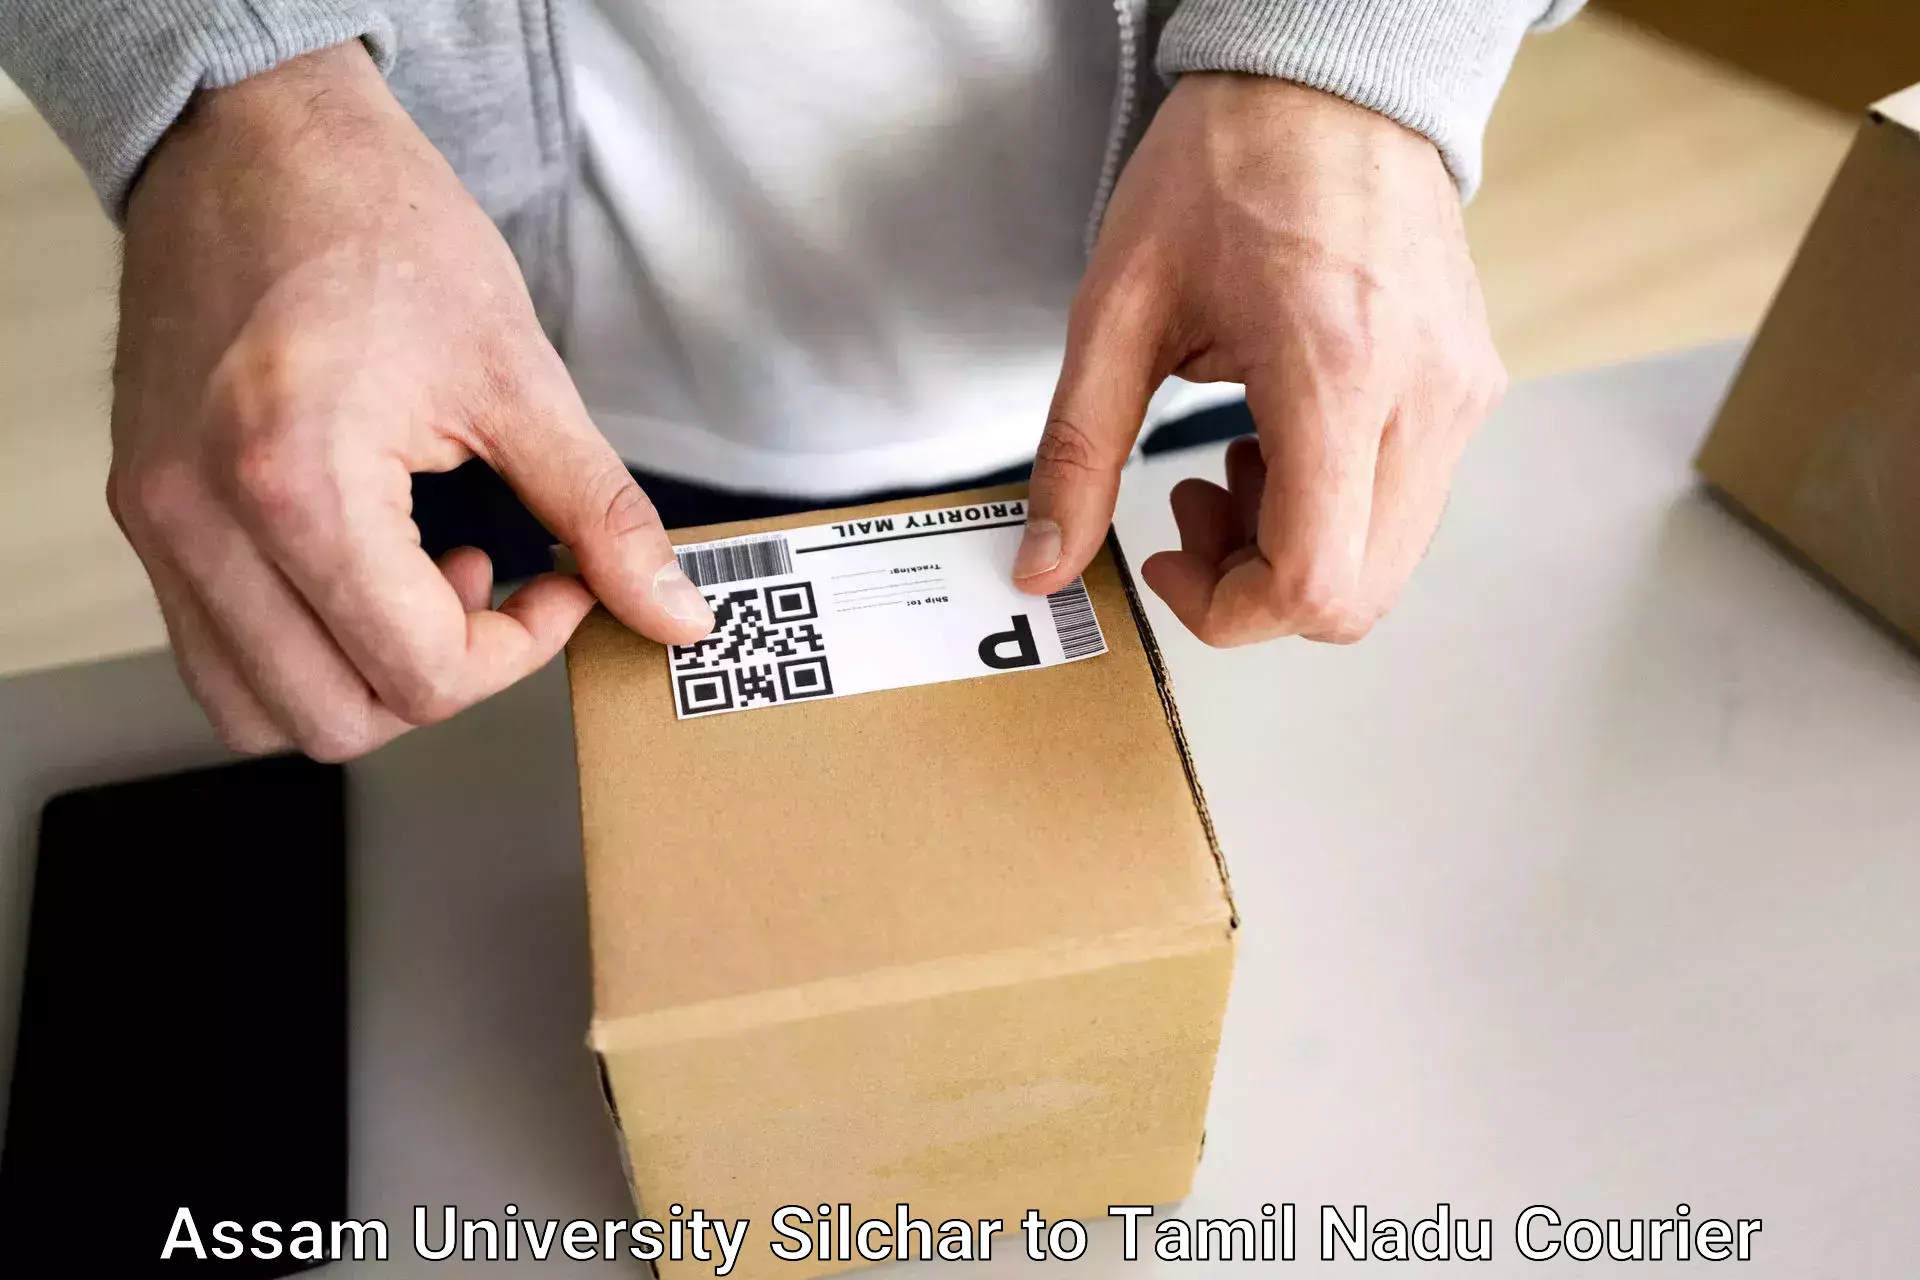 Hassle-free luggage shipping Assam University Silchar to Coimbatore